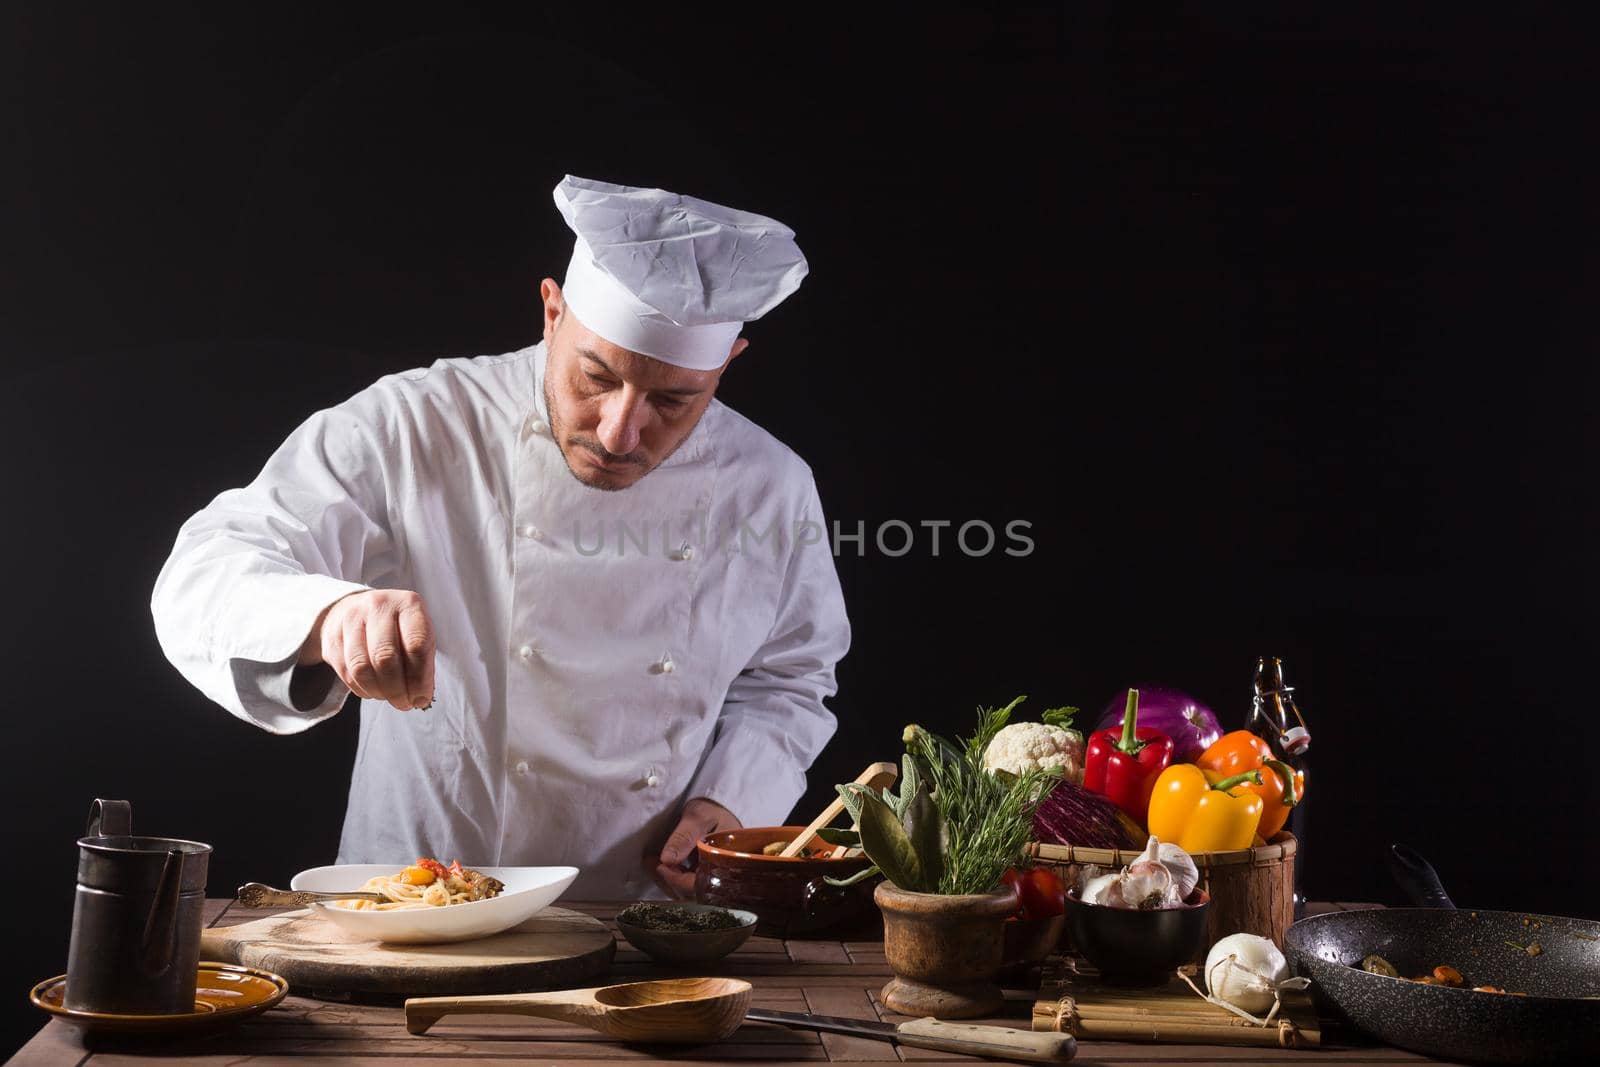 Male cook in white uniform and hat putting herbs on food plate with vegetable by bepsimage